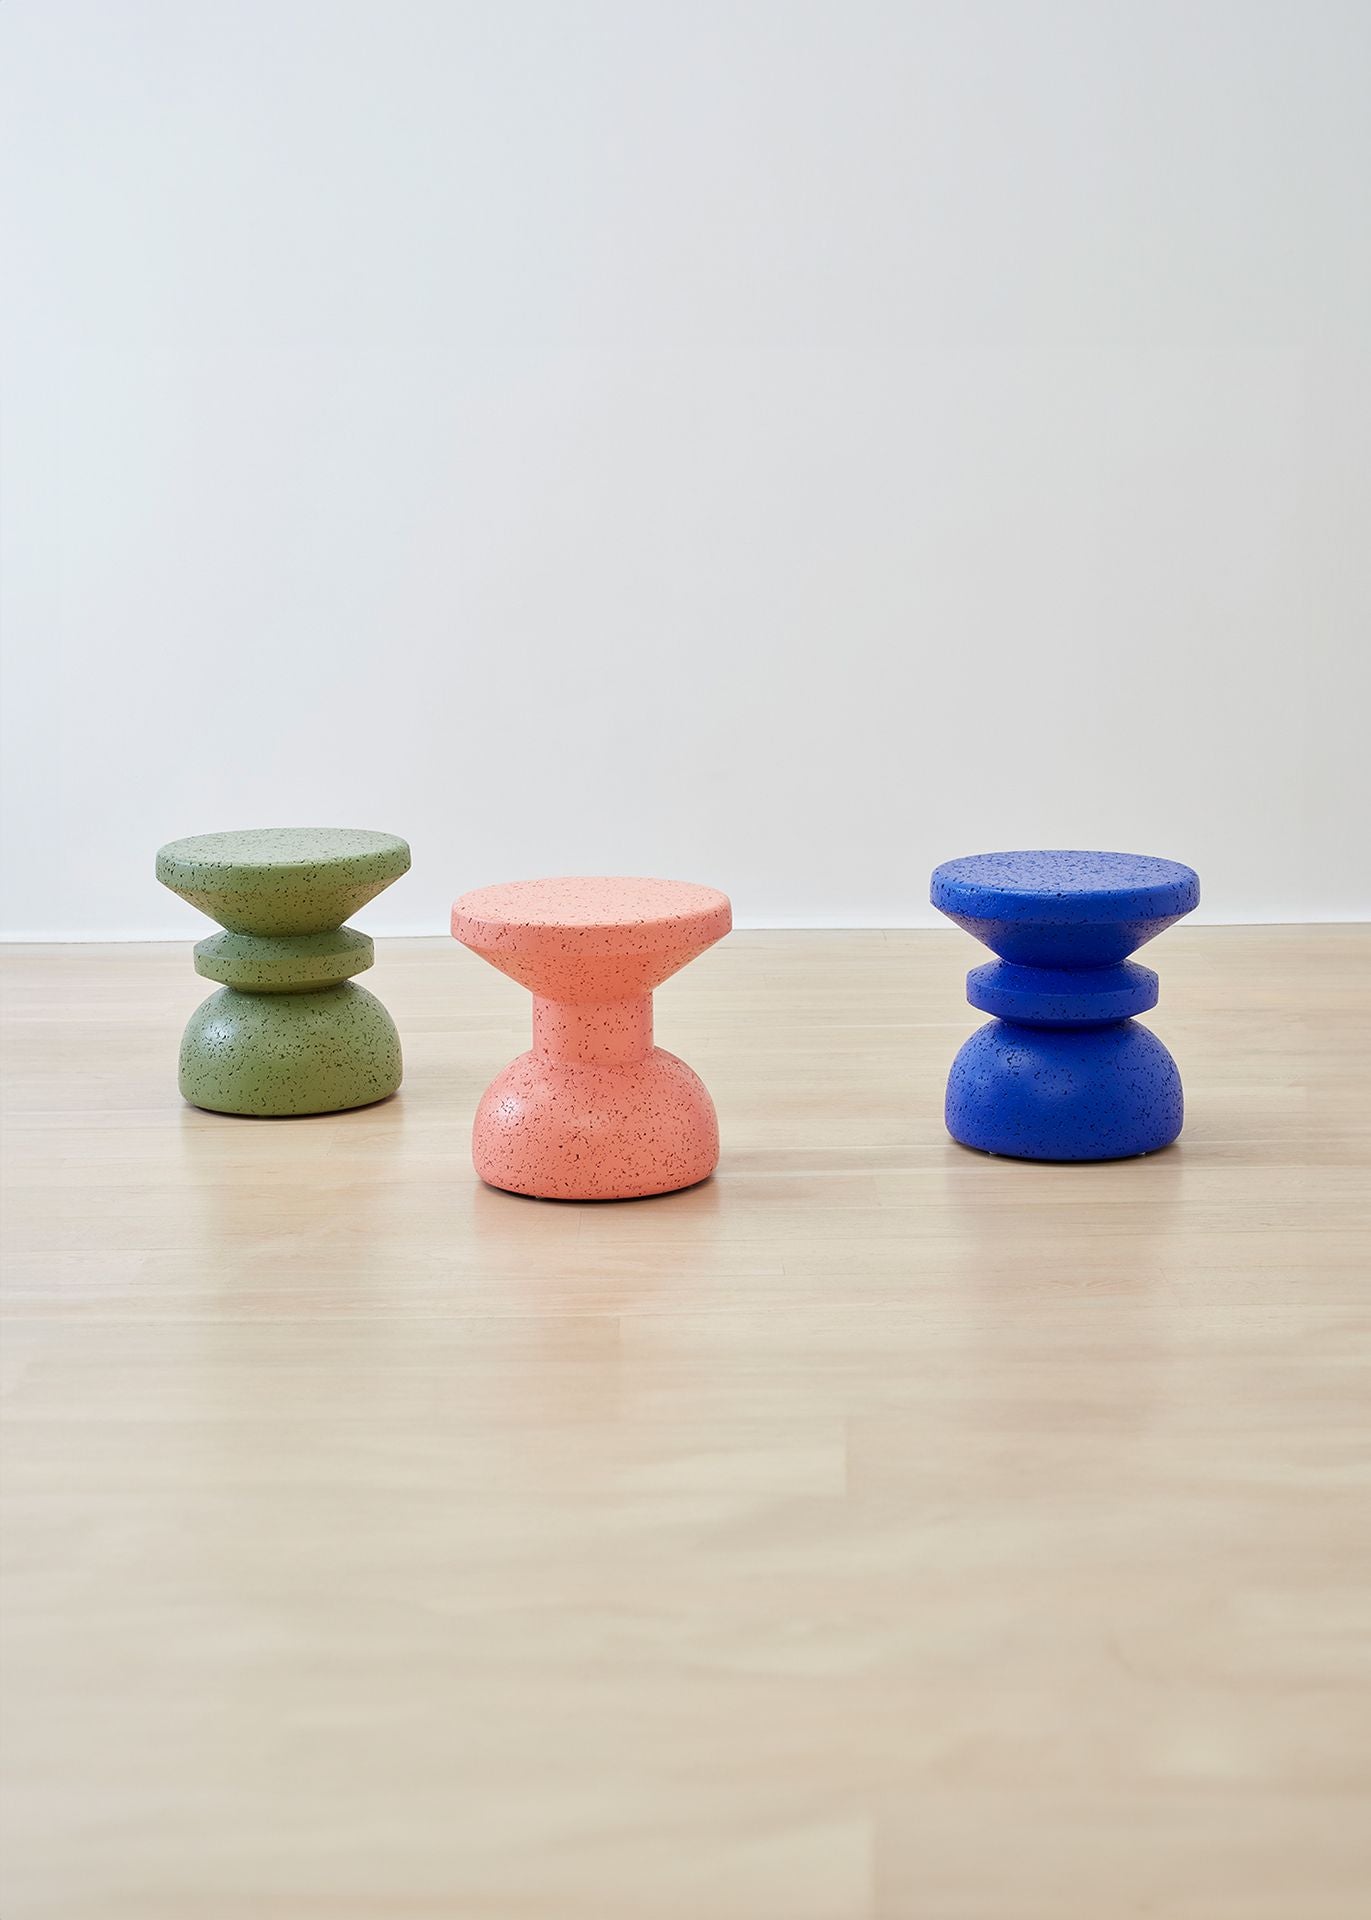 Exquisite Kanju Wiid African Painted Cork Stool collection, showcasing Slim and Stacked designs in a palette of green, blue, and pink. Each stool blends vibrant color with sustainable cork craftsmanship, embodying a fusion of eco-friendly materials and bold, modern aesthetics. Ideal for interiors seeking a splash of color and unique, artisanal design.